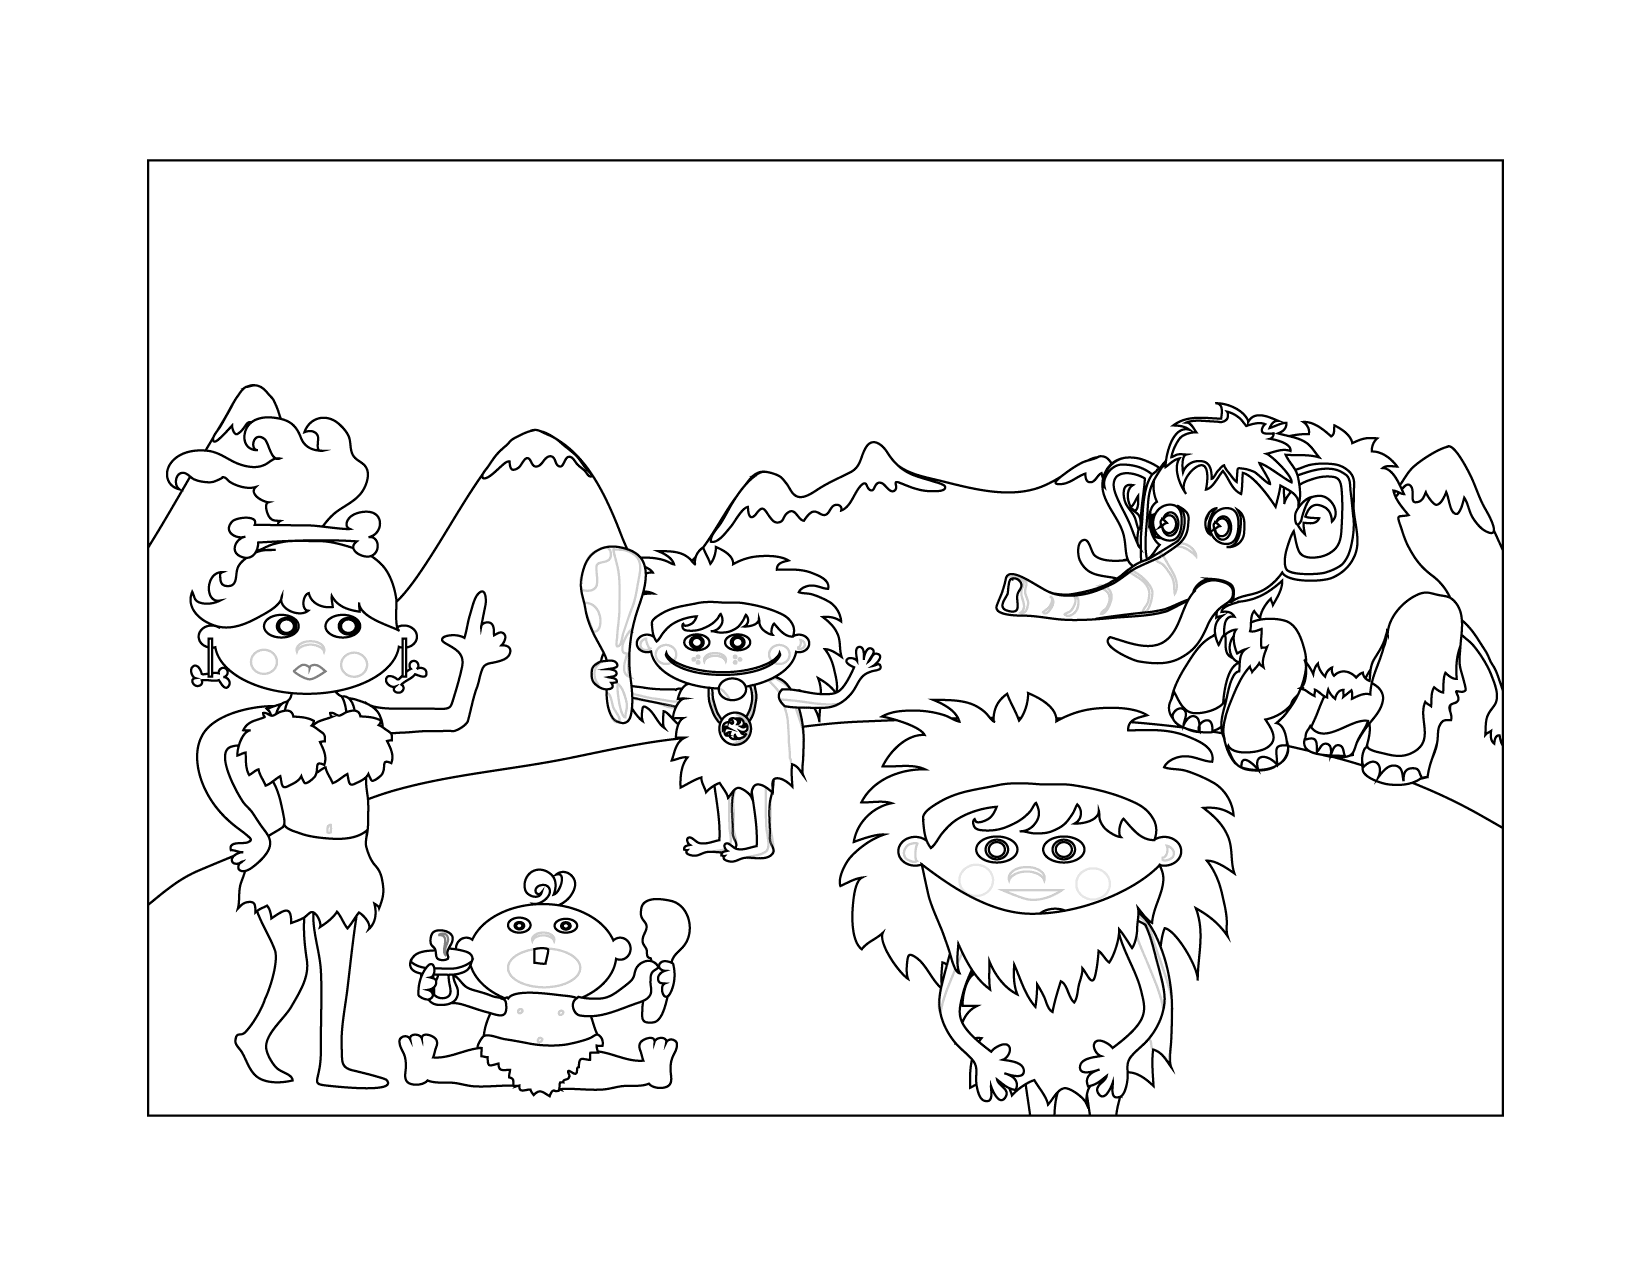 Prehistoric Family Coloring Page